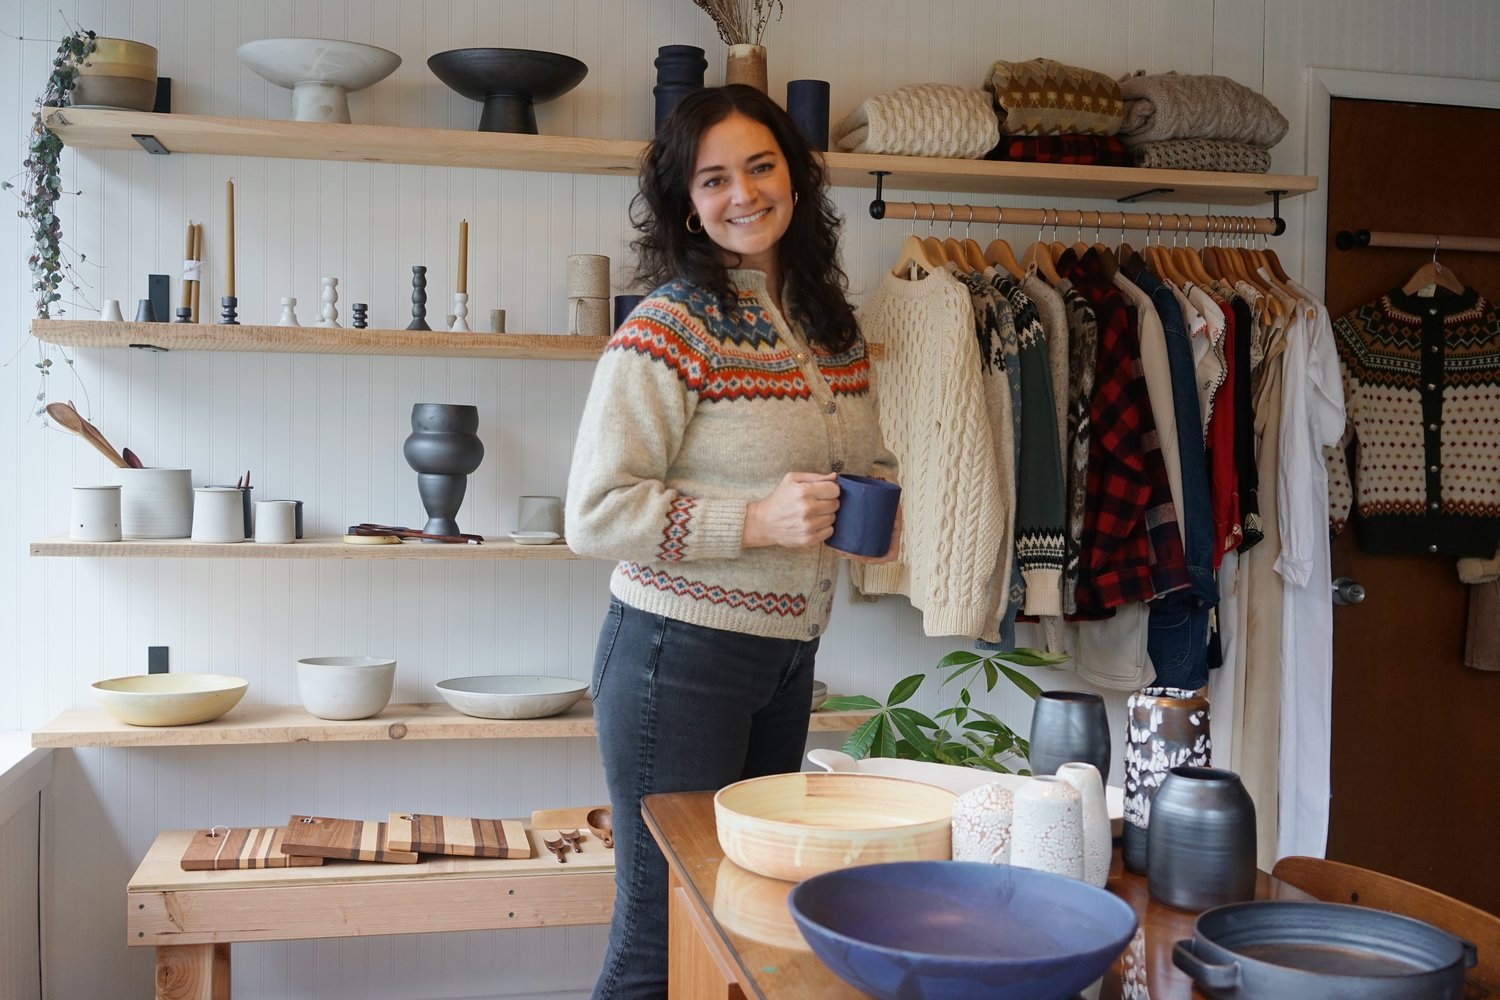 Potter Jessie Lazar has opened a home goods shop in Eldred, NY